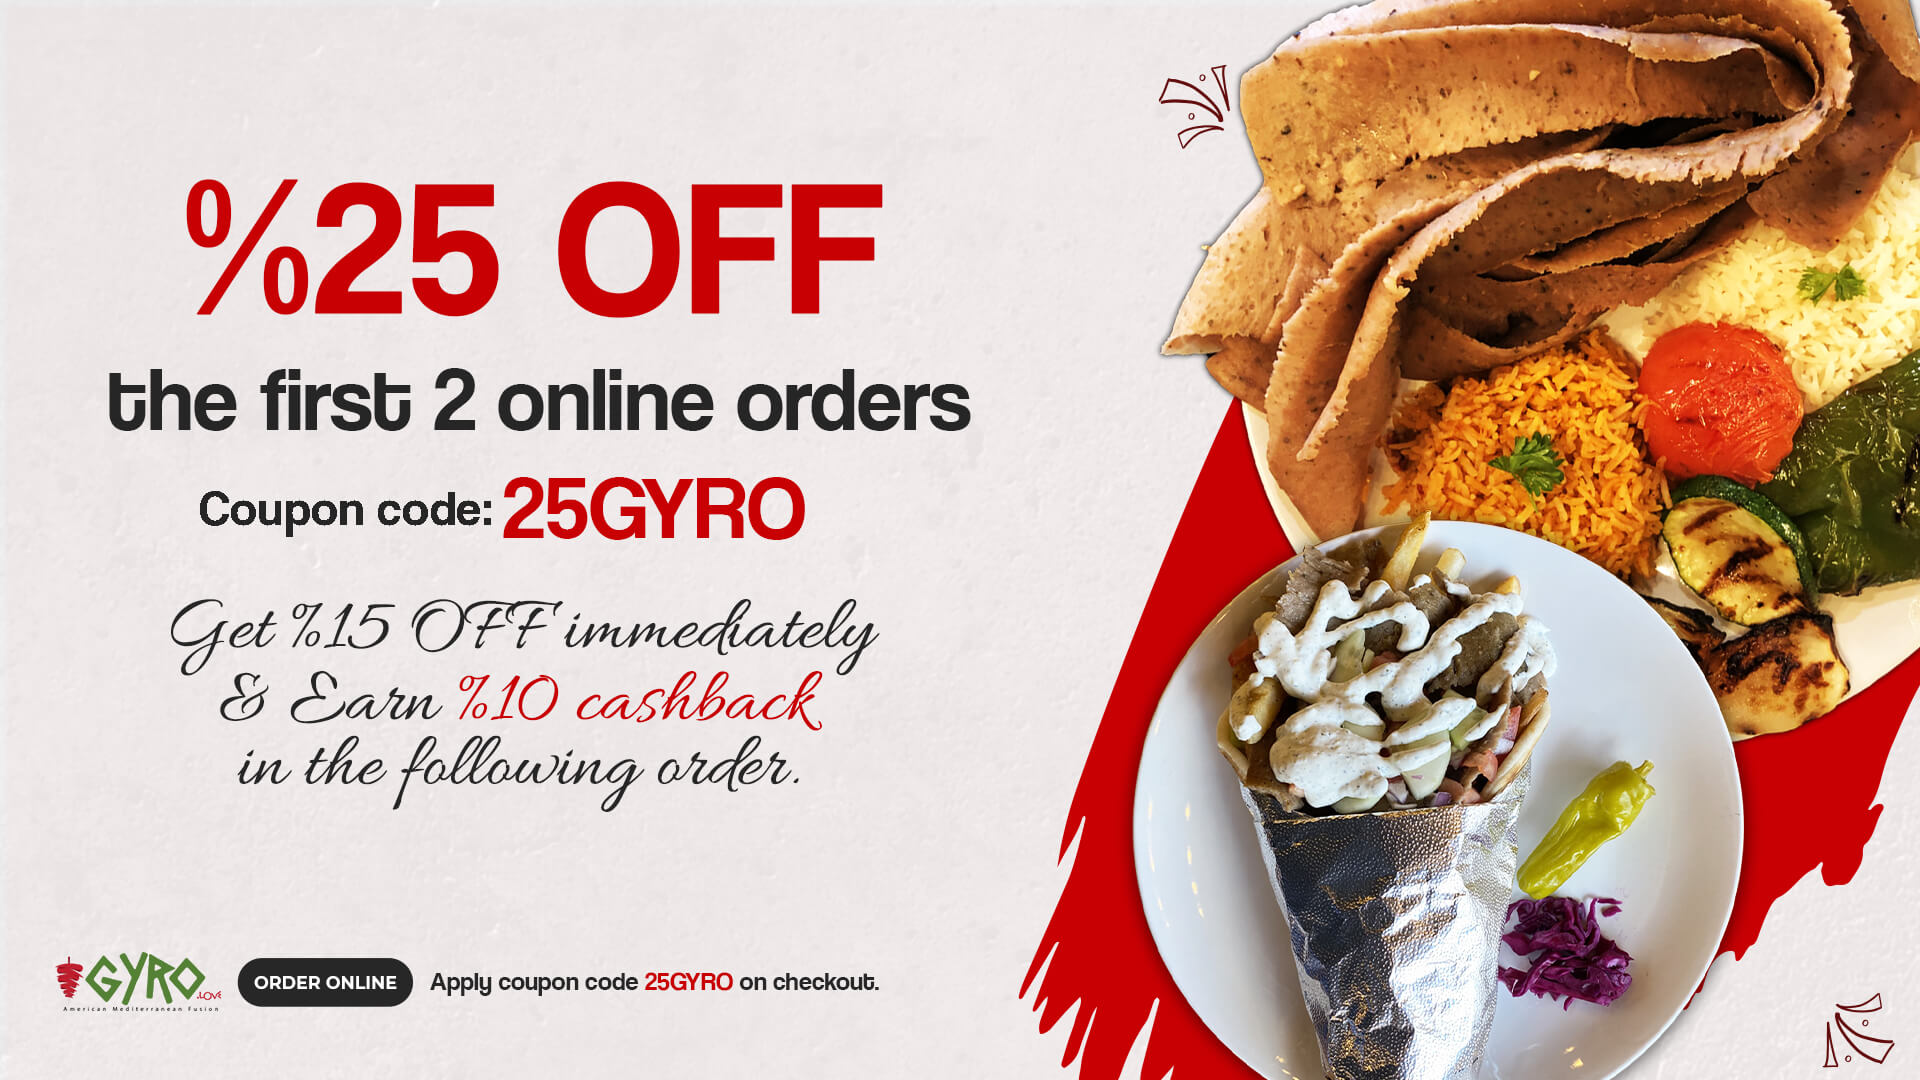 Discount codes for online ethnic food orders